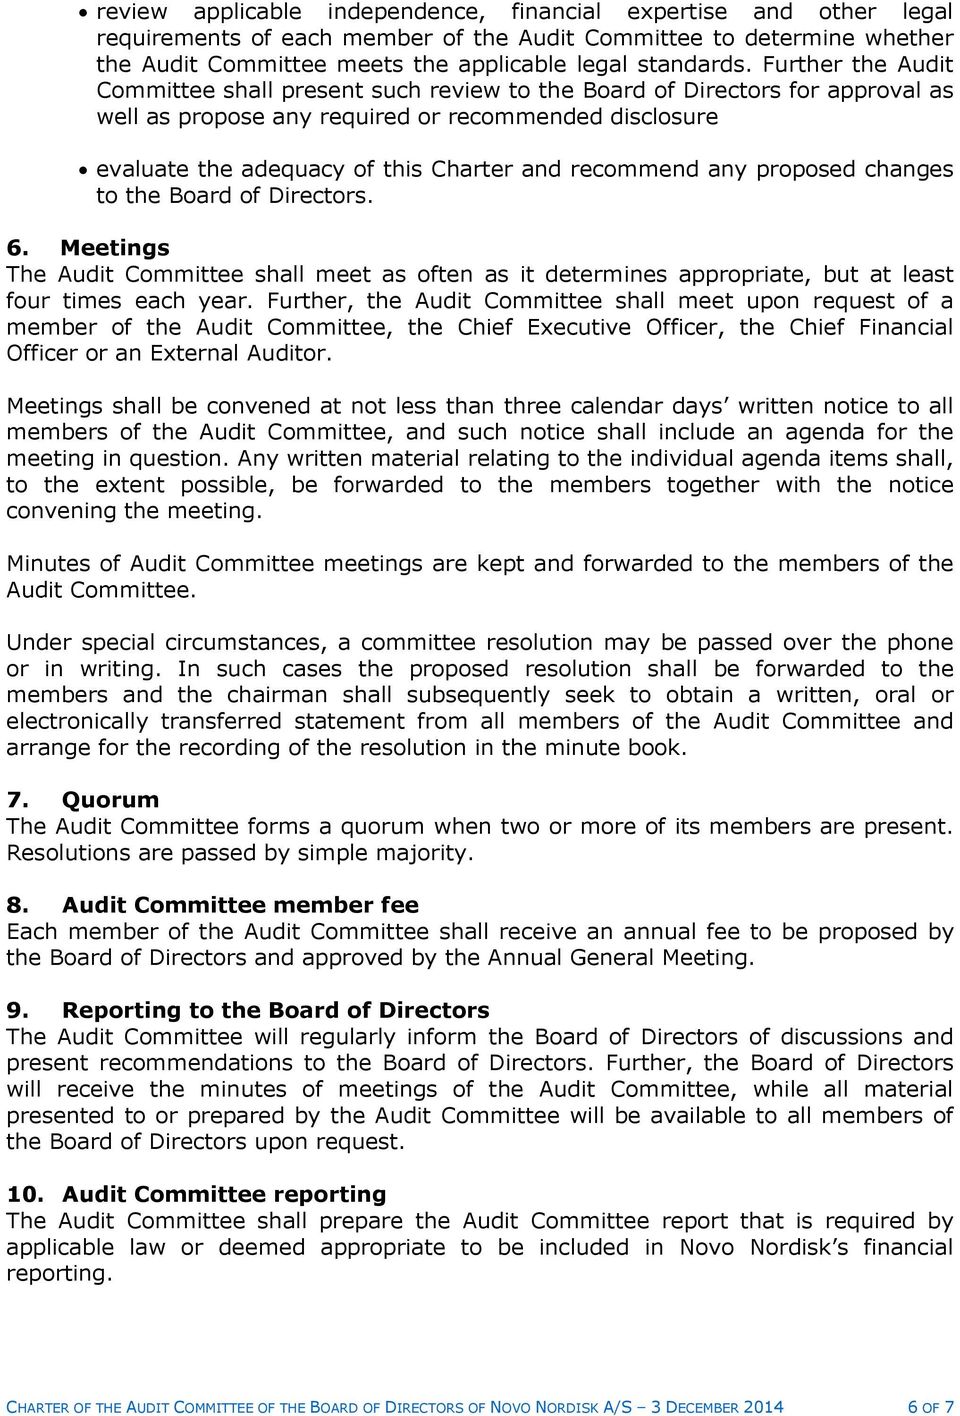 recommend any proposed changes to the Board of Directors. 6. Meetings The Audit Committee shall meet as often as it determines appropriate, but at least four times each year.